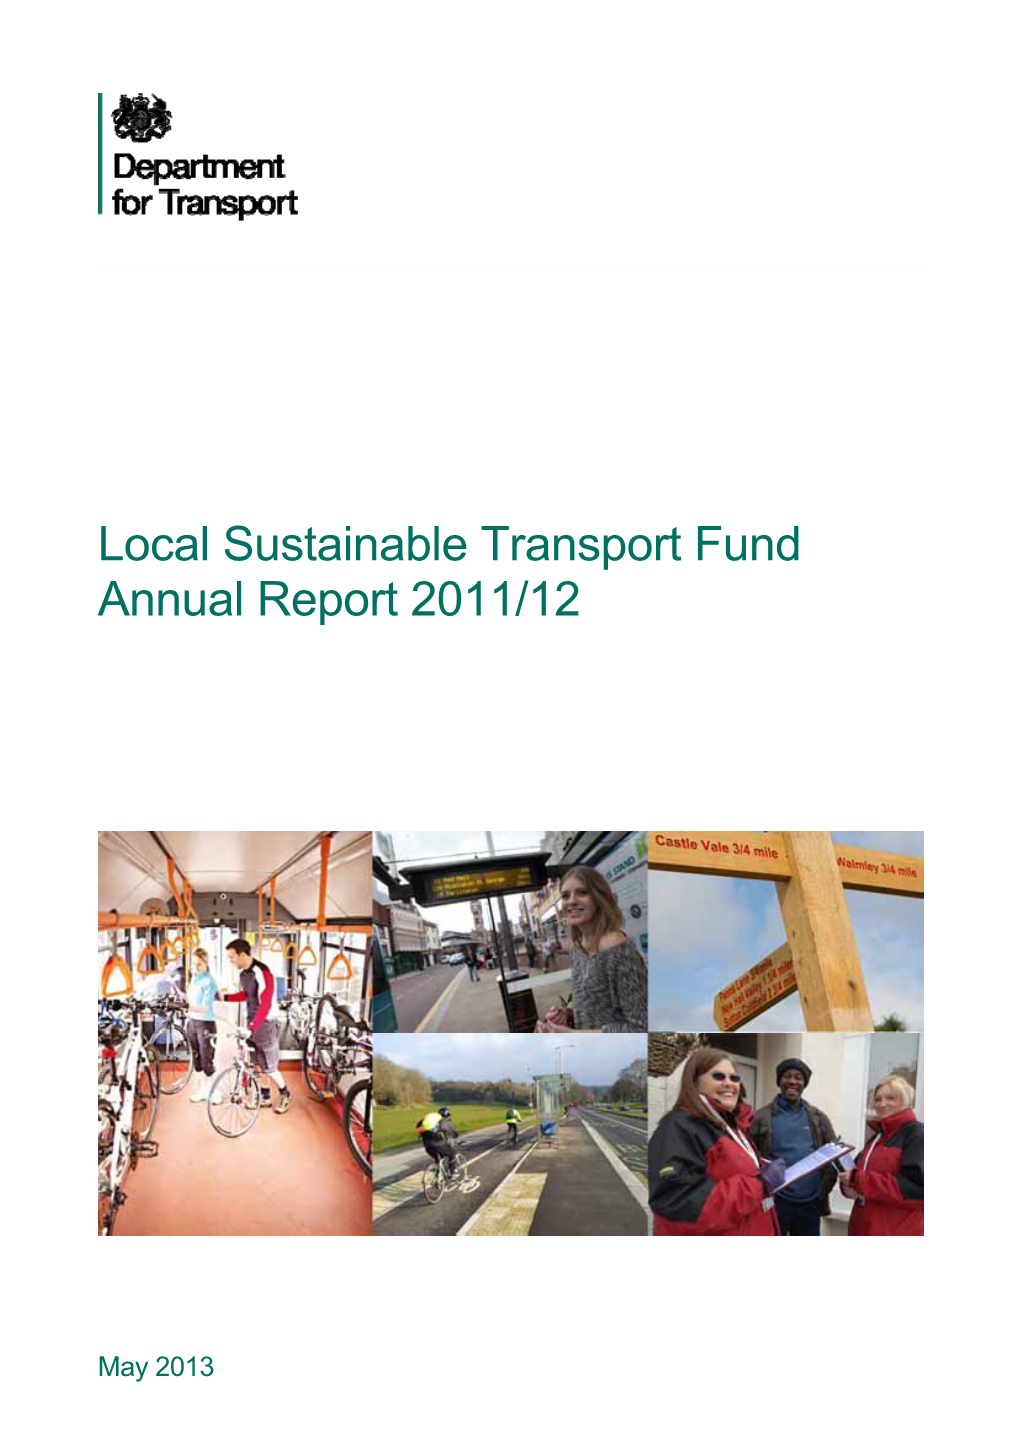 Local Sustainable Transport Fund Annual Report 2011 to 2012